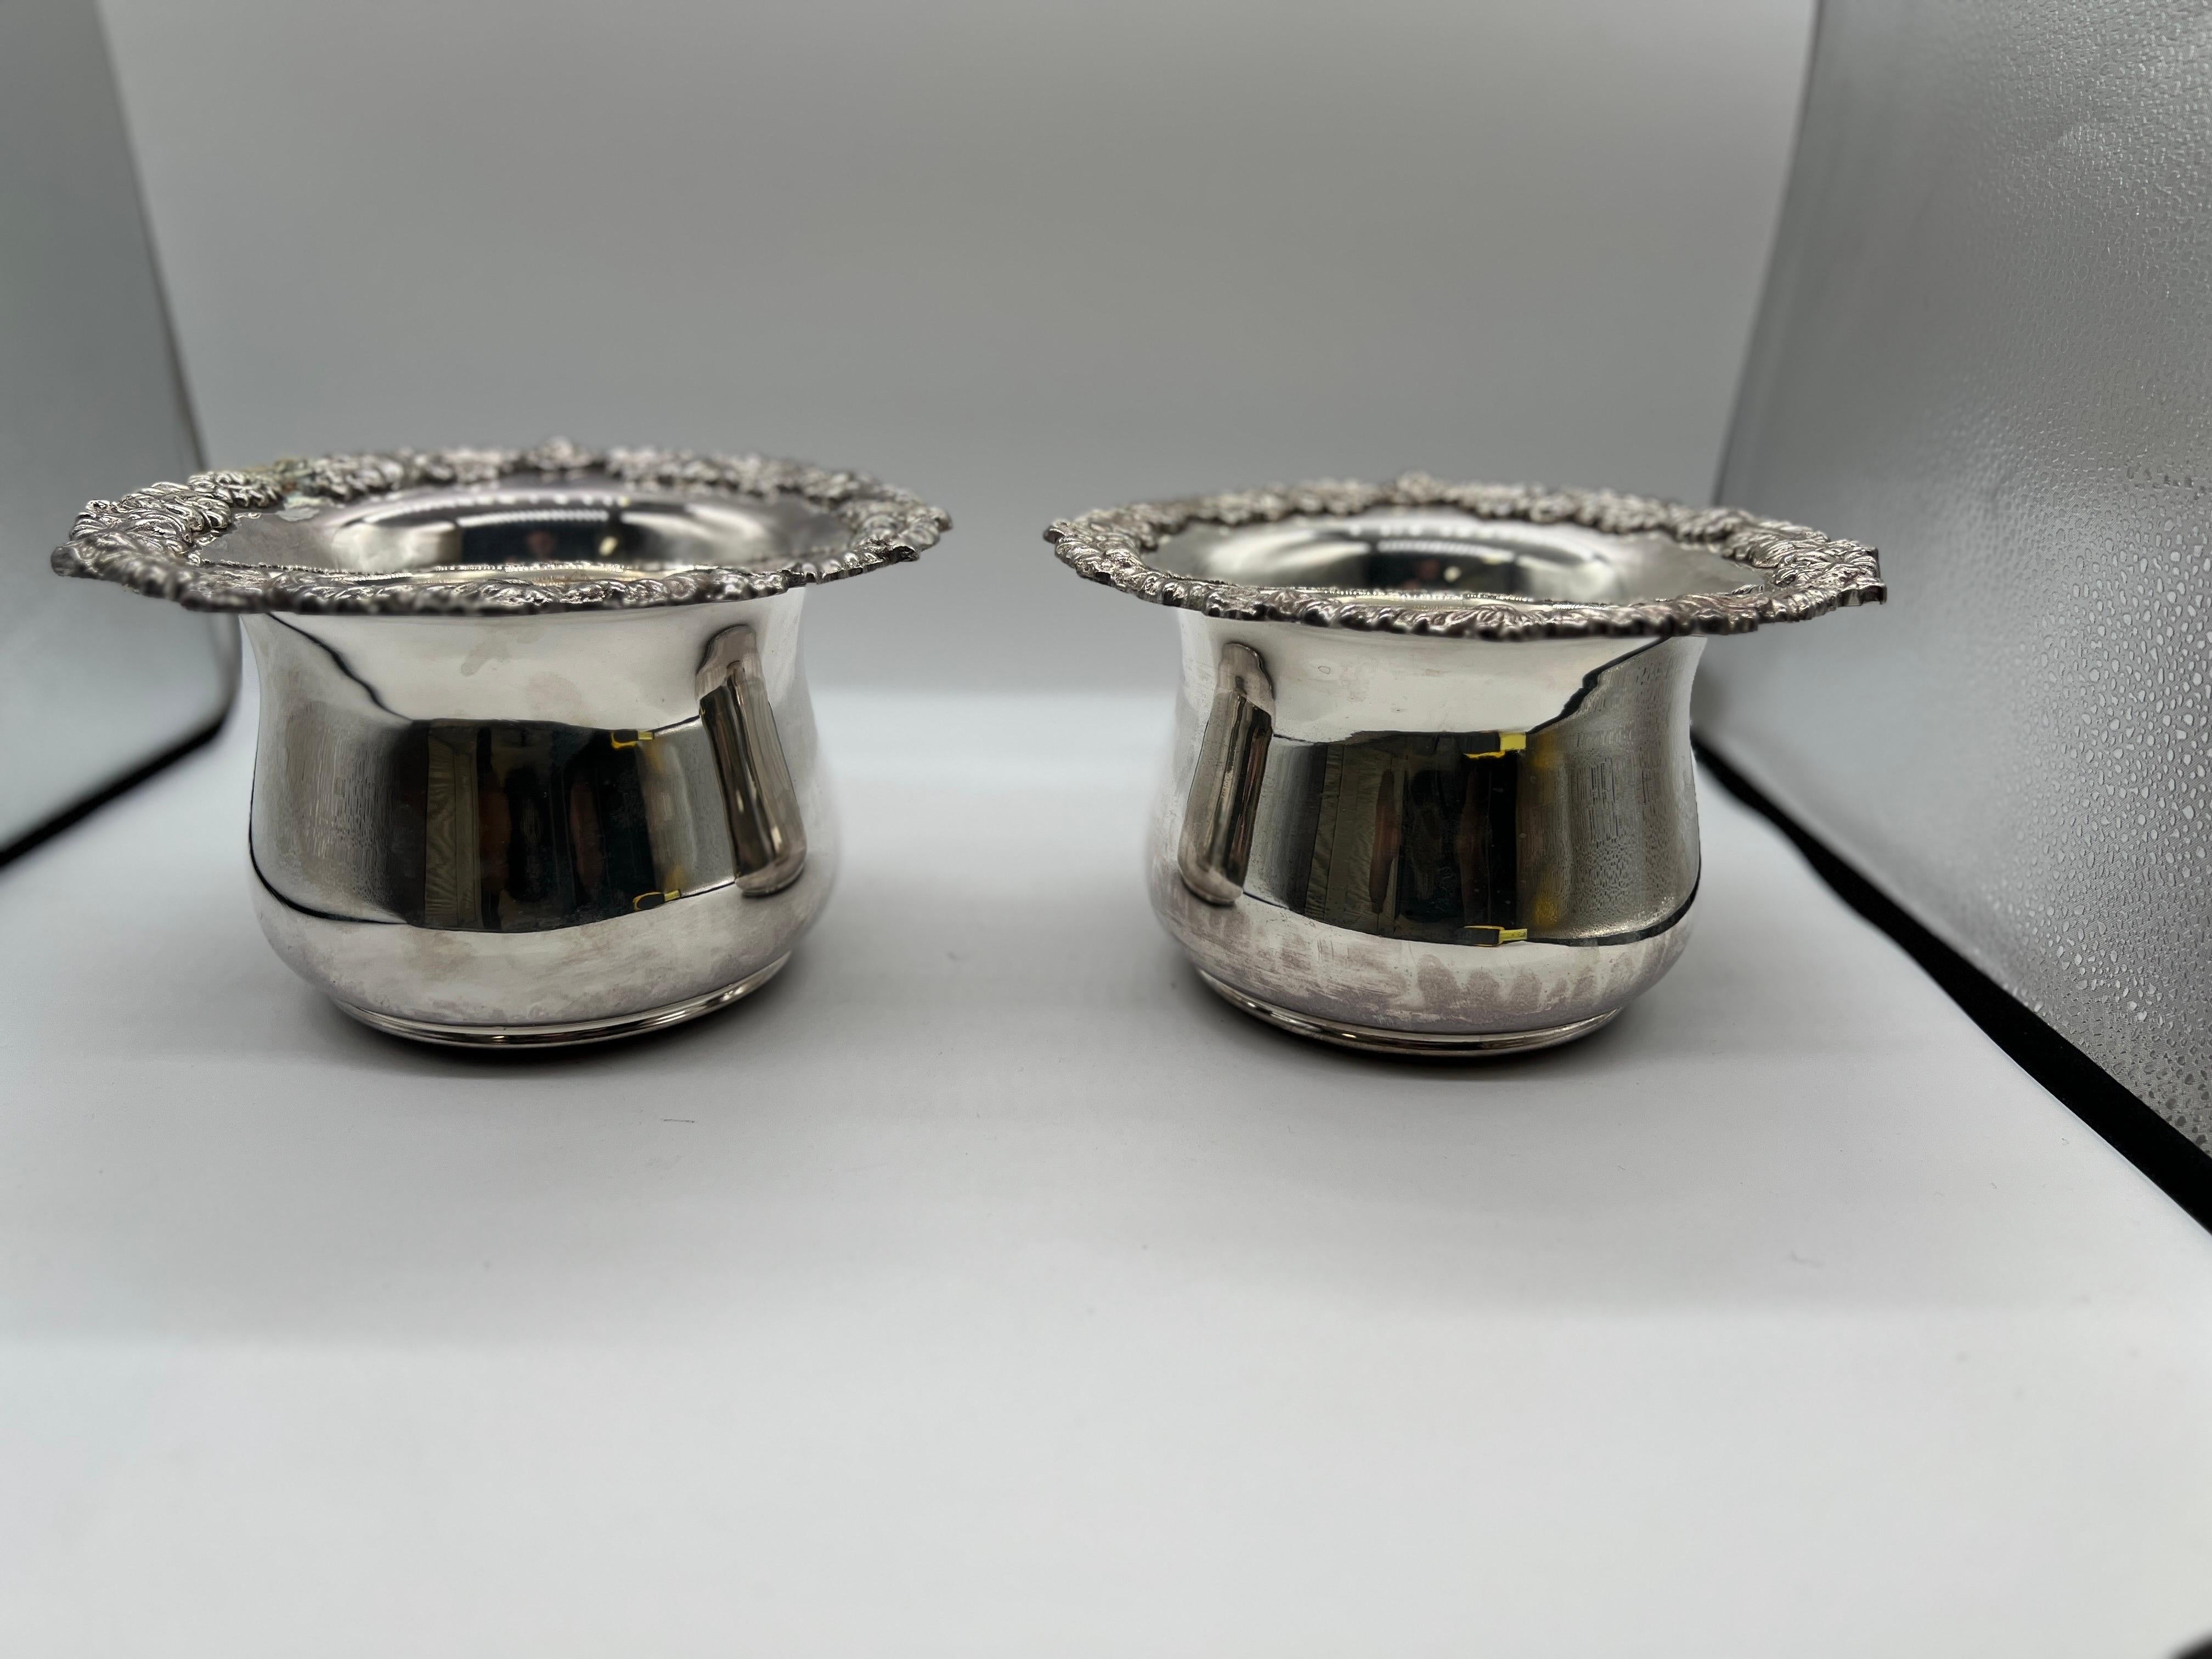 A pair of large Royal Castle silverplated bottle holders or coasters with floral and rococo style banding to the border rim. Each marked to interior of bowl and made in Sheffield England.